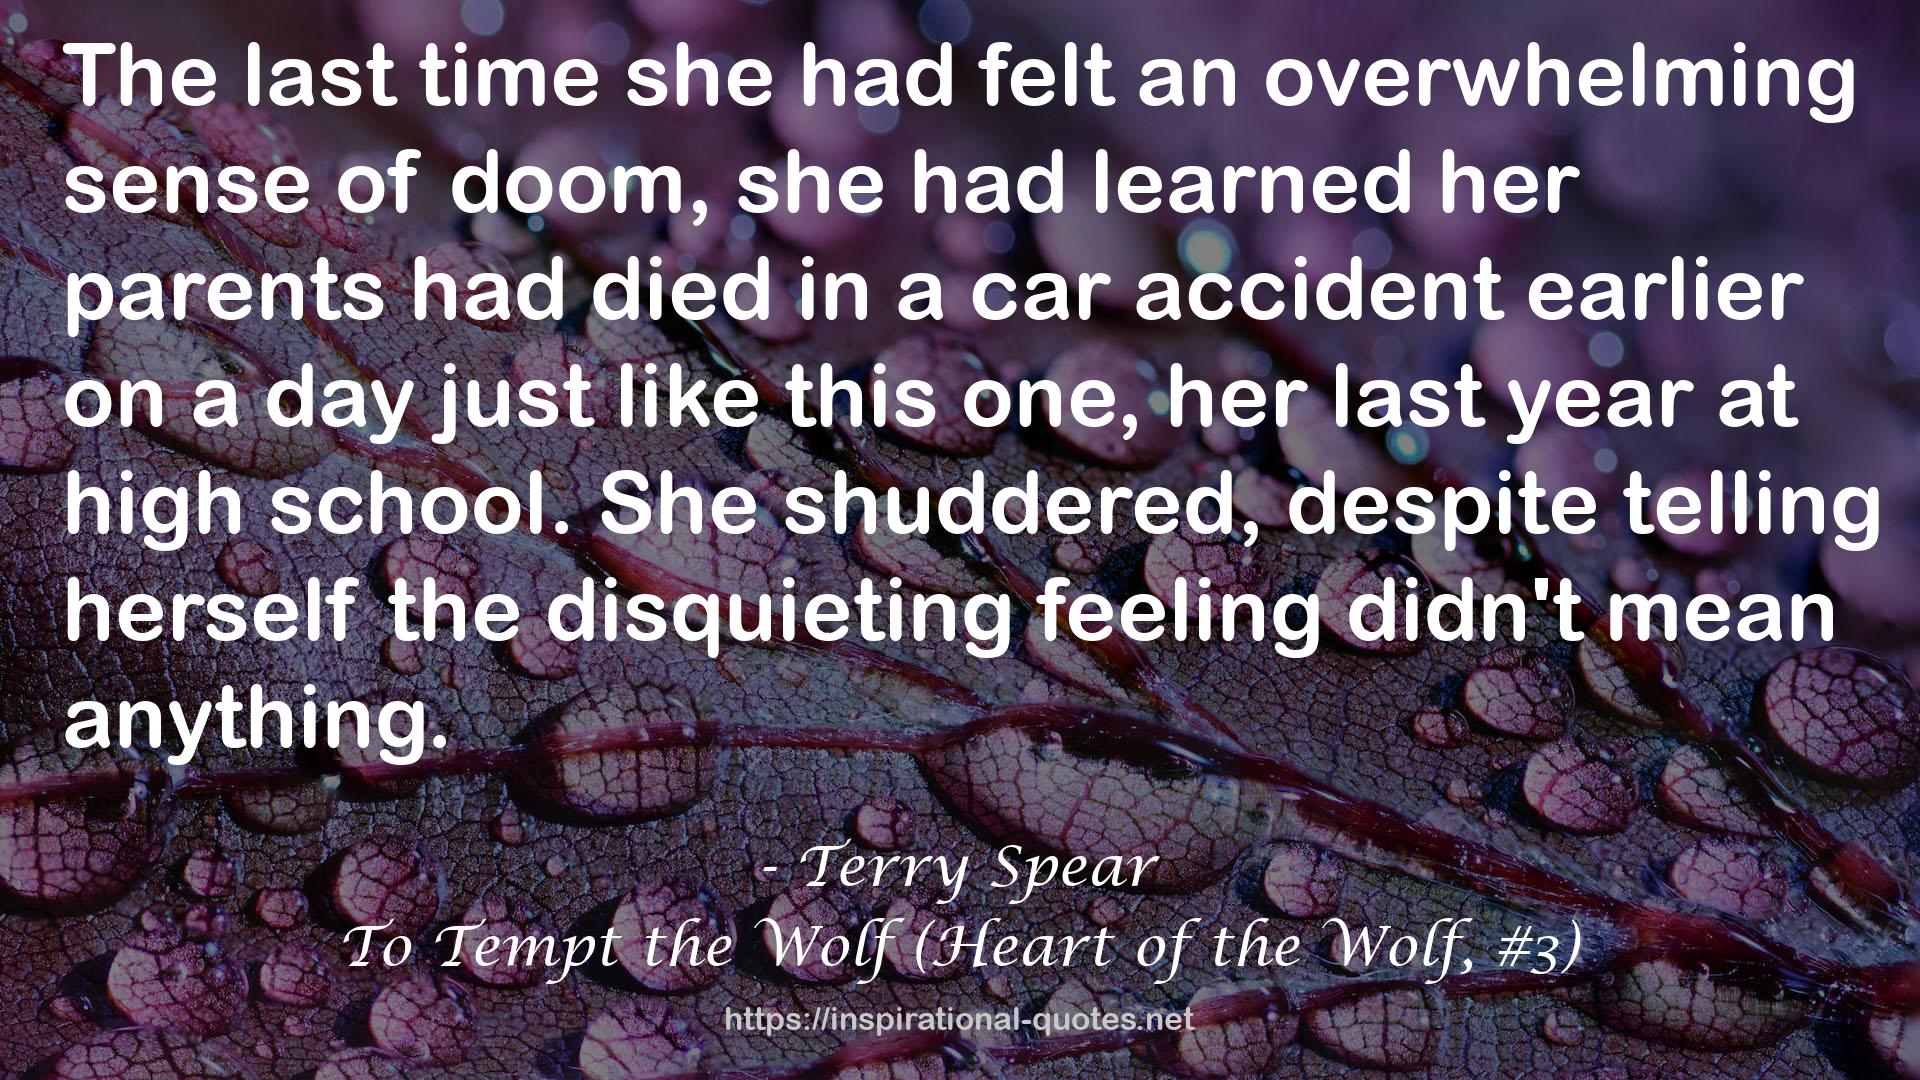 To Tempt the Wolf (Heart of the Wolf, #3) QUOTES